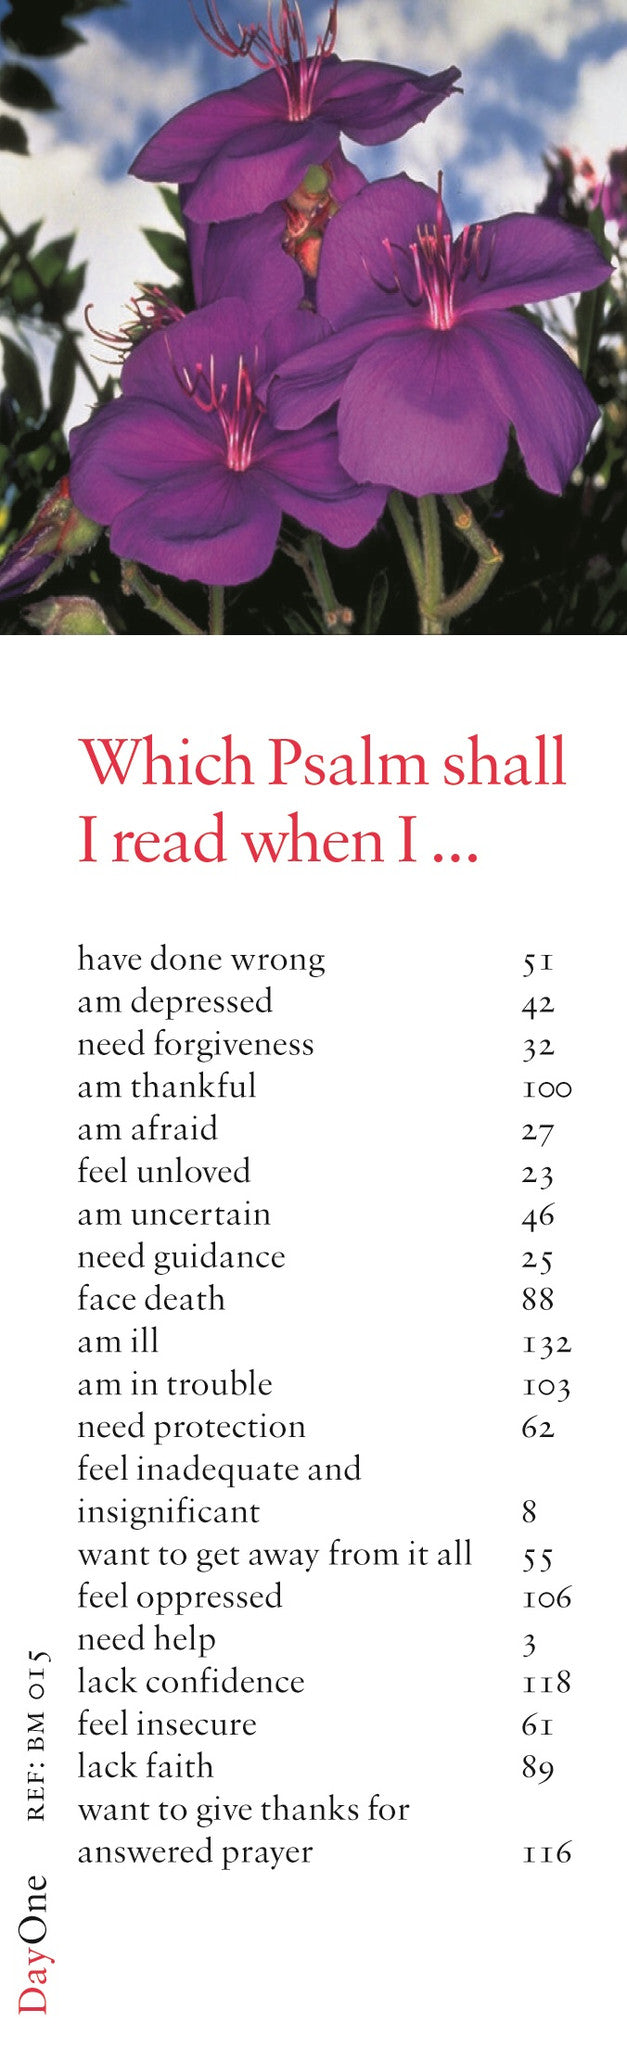 Which Psalm shall I read